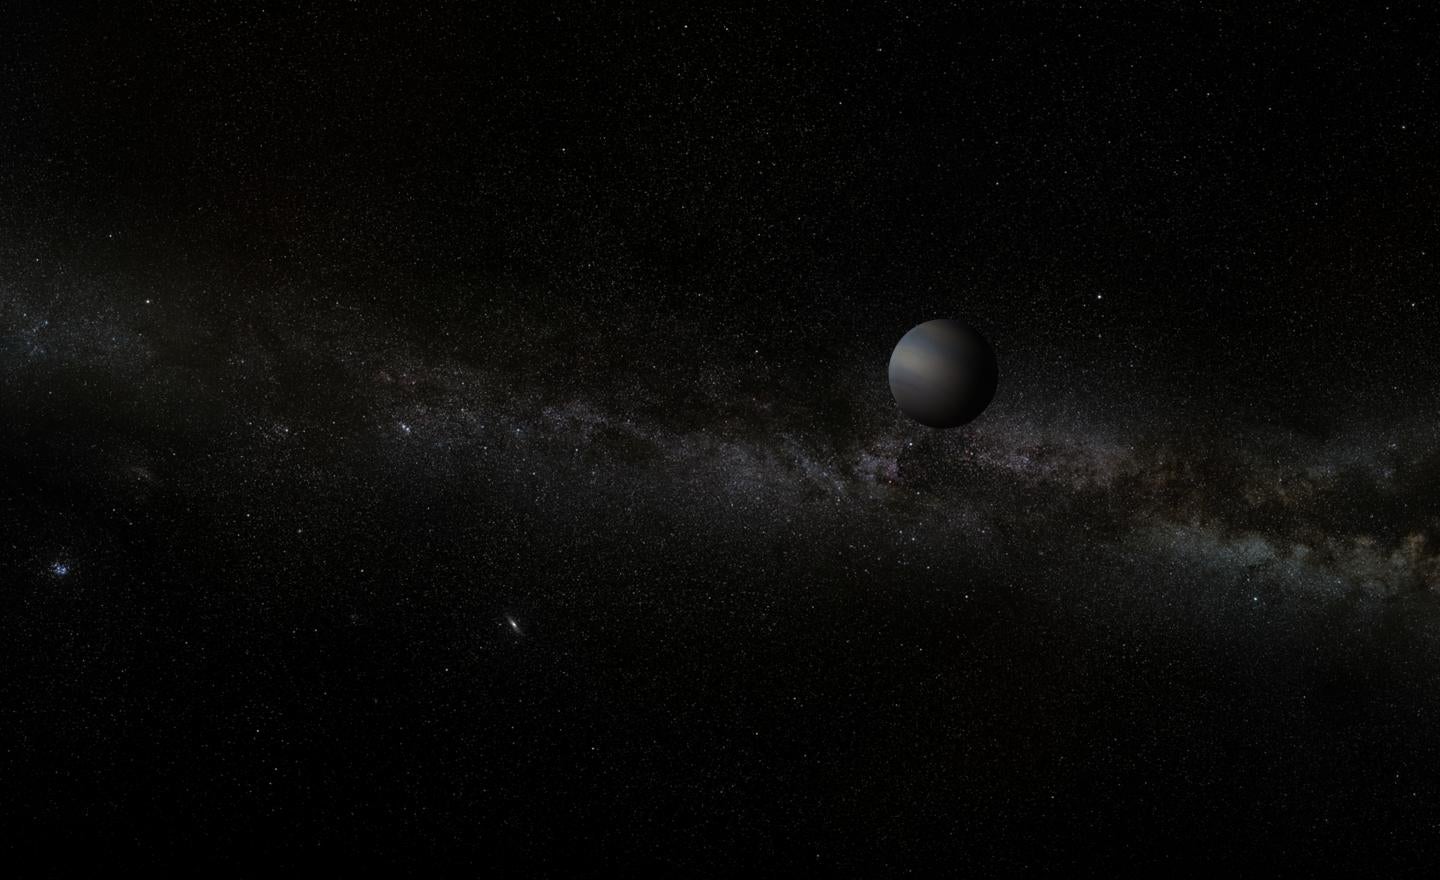 Artist's impression of a free-floating planet.